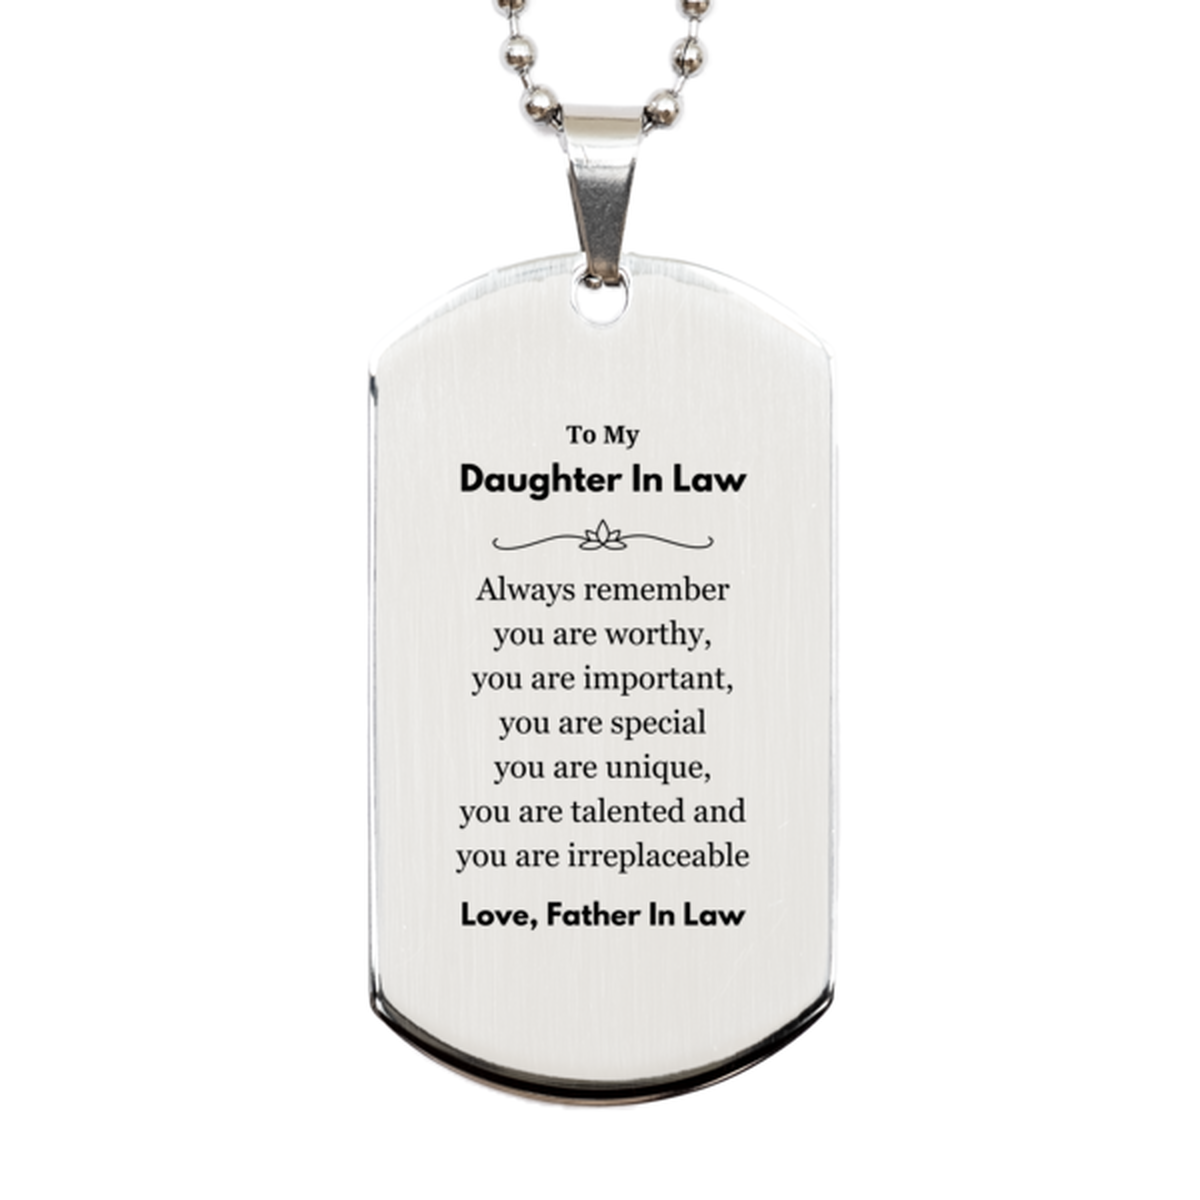 Daughter In Law Birthday Gifts from Father In Law, Inspirational Silver Dog Tag for Daughter In Law Christmas Graduation Gifts for Daughter In Law Always remember you are worthy, you are important. Love, Father In Law